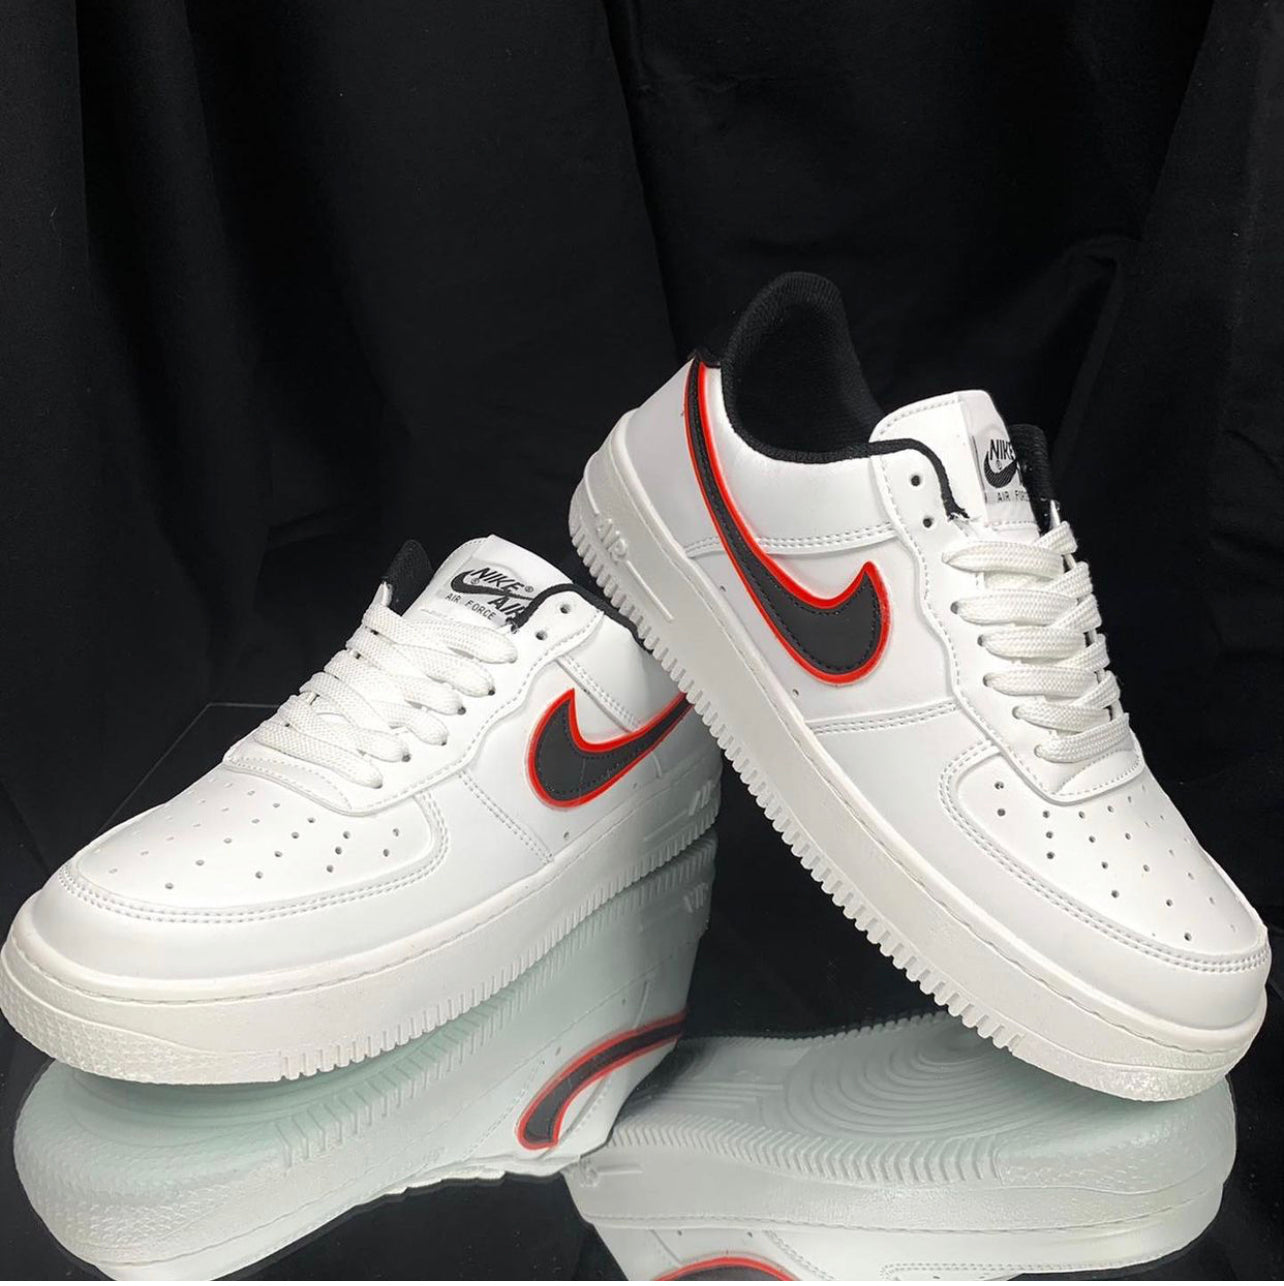 Air force 1 “White-Black-Red”